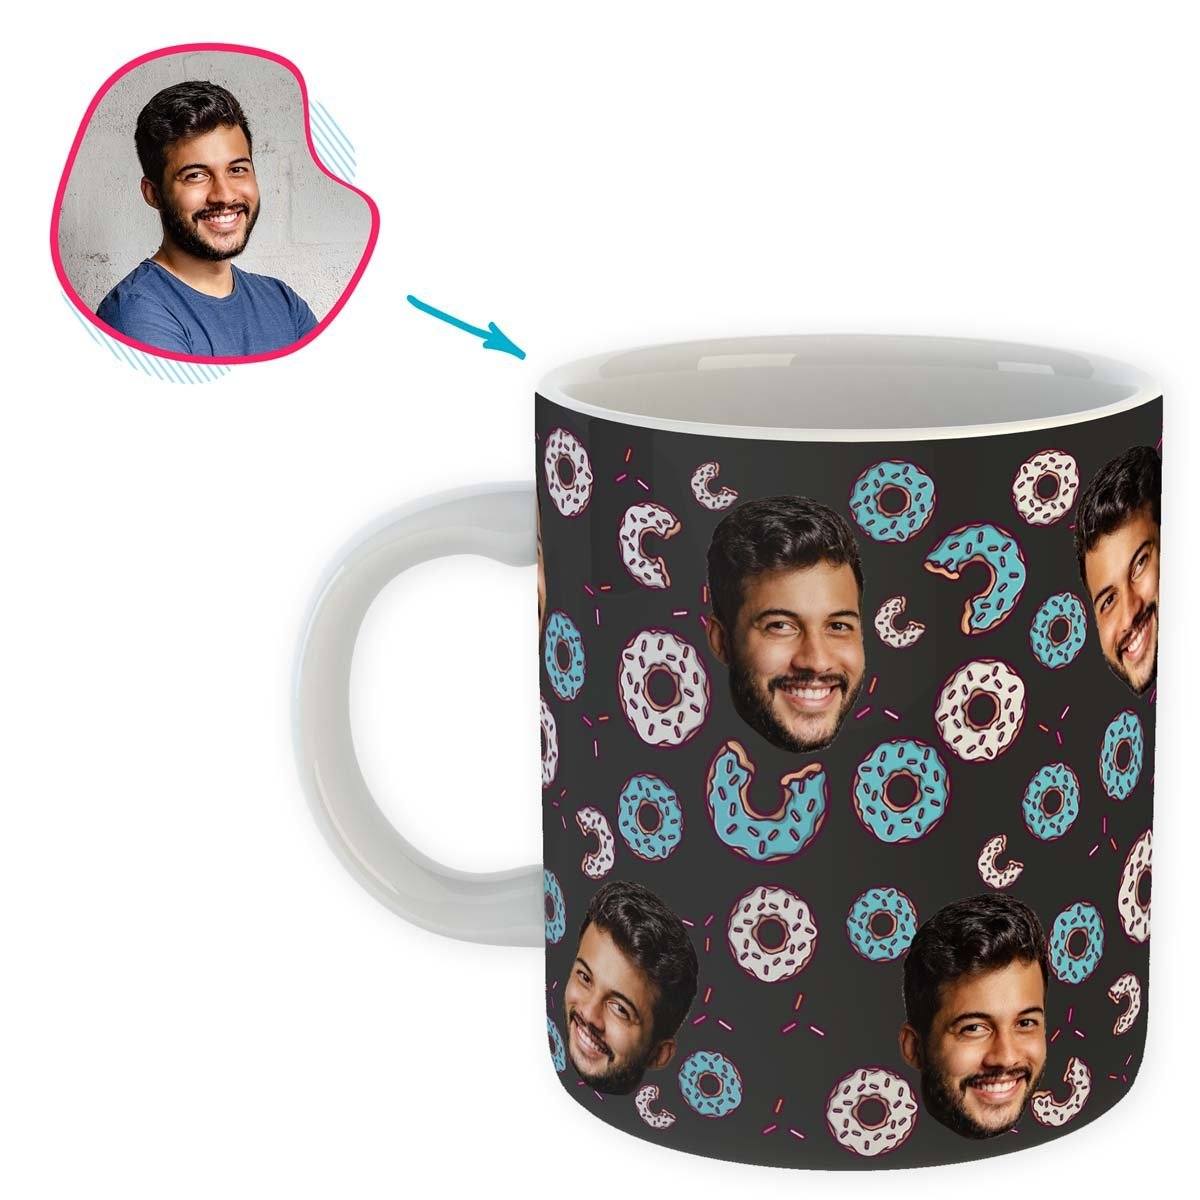 dark Donuts mug personalized with photo of face printed on it